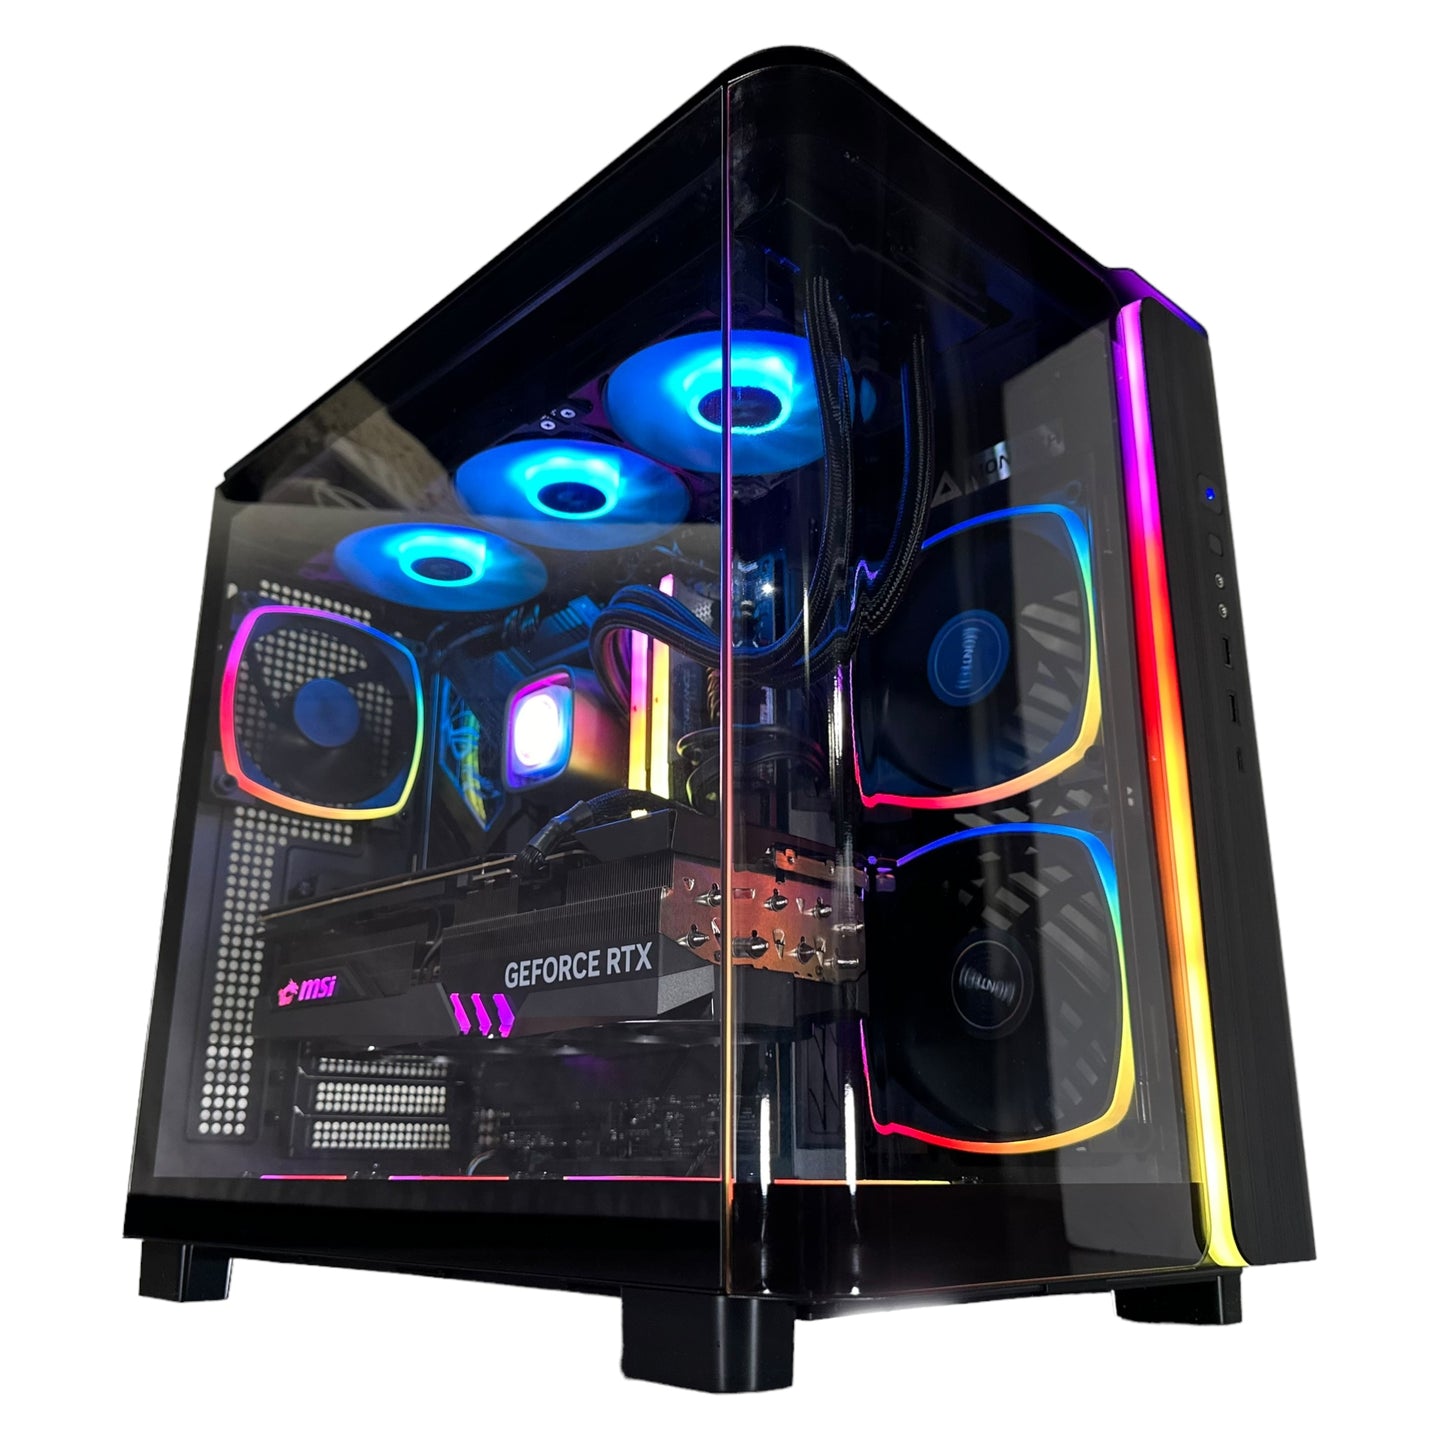 Top Tier Brand New High End 24-Core Gaming PC, ASUS ROG, i9-14900KF, RTX 4090 24GB, 64GB 6400mhz DDR5 RAM, 4TB NVME SSD, 8TB HDD (Options), WIFI + BT